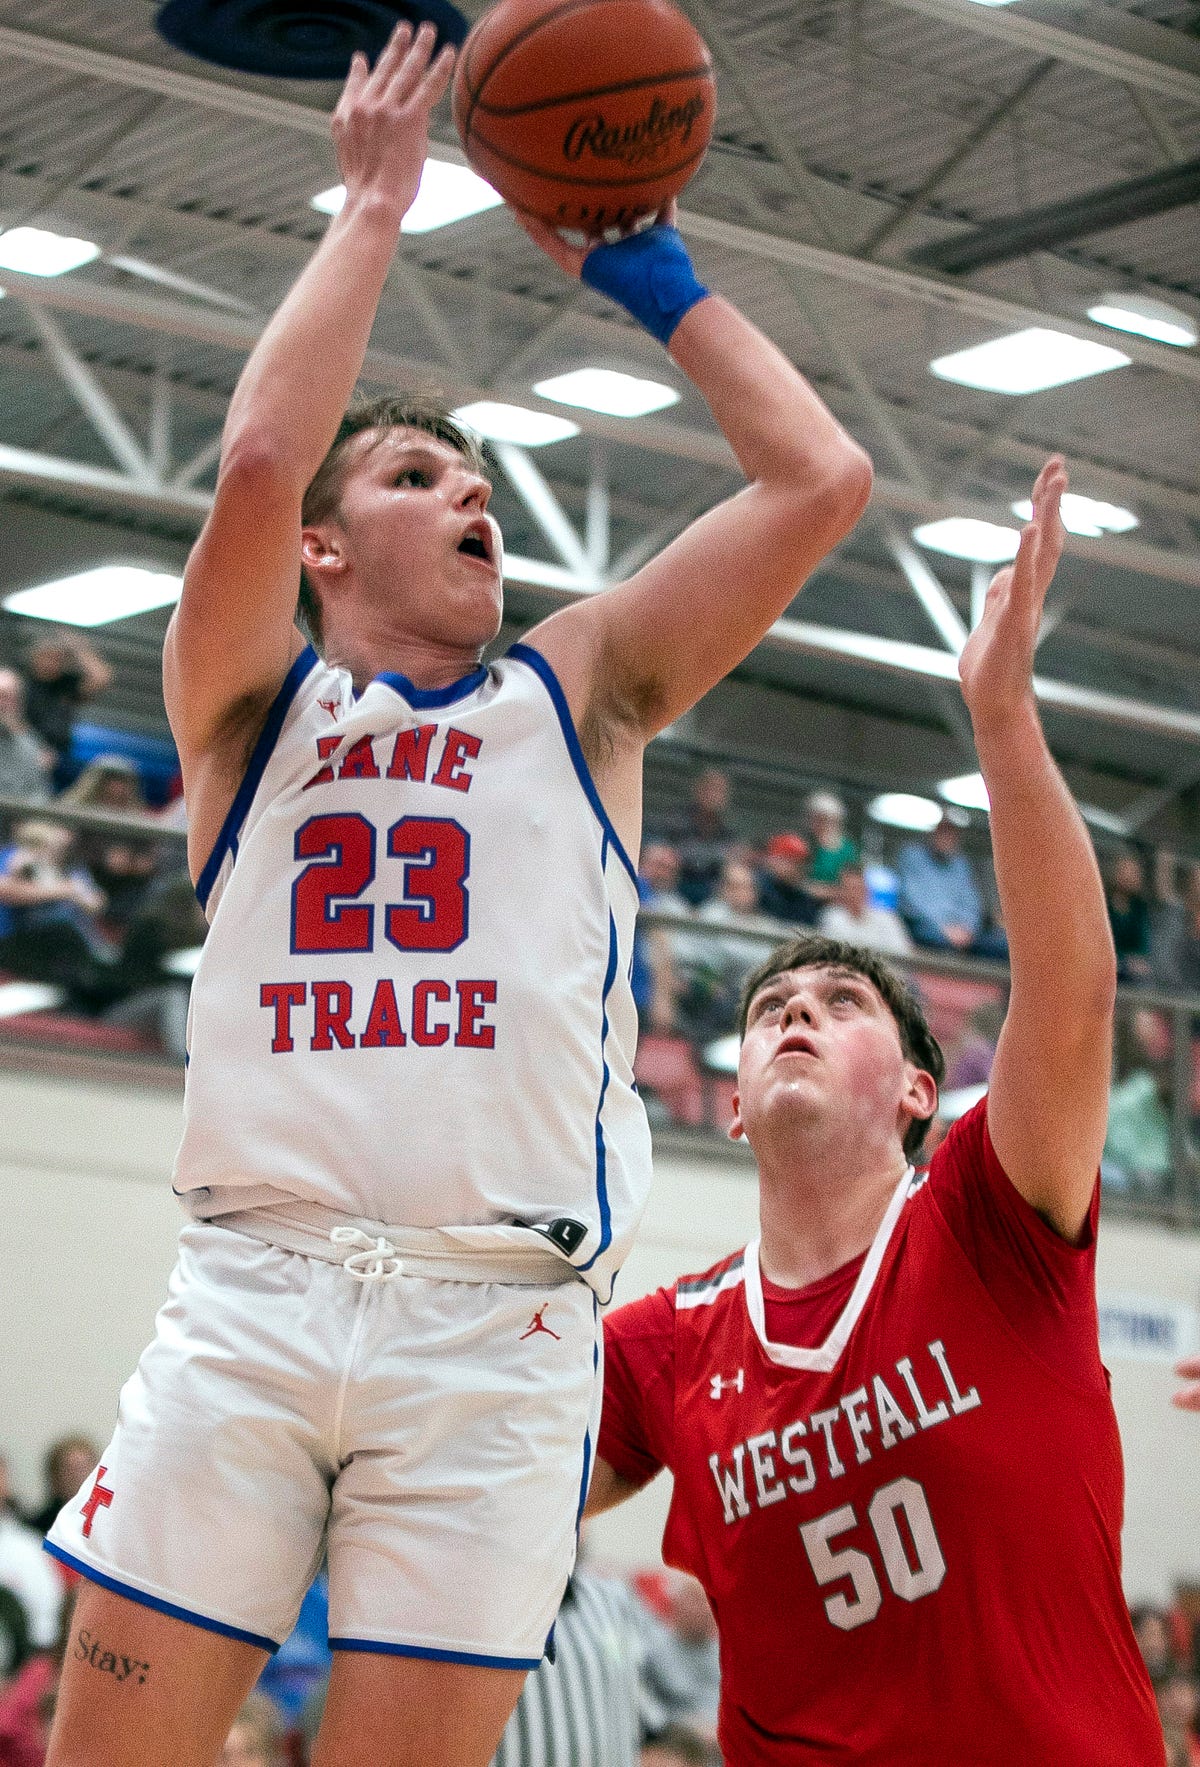 Zane Trace Dominates Westfall in Key Conference Victory with 3-Point Shooting Strength